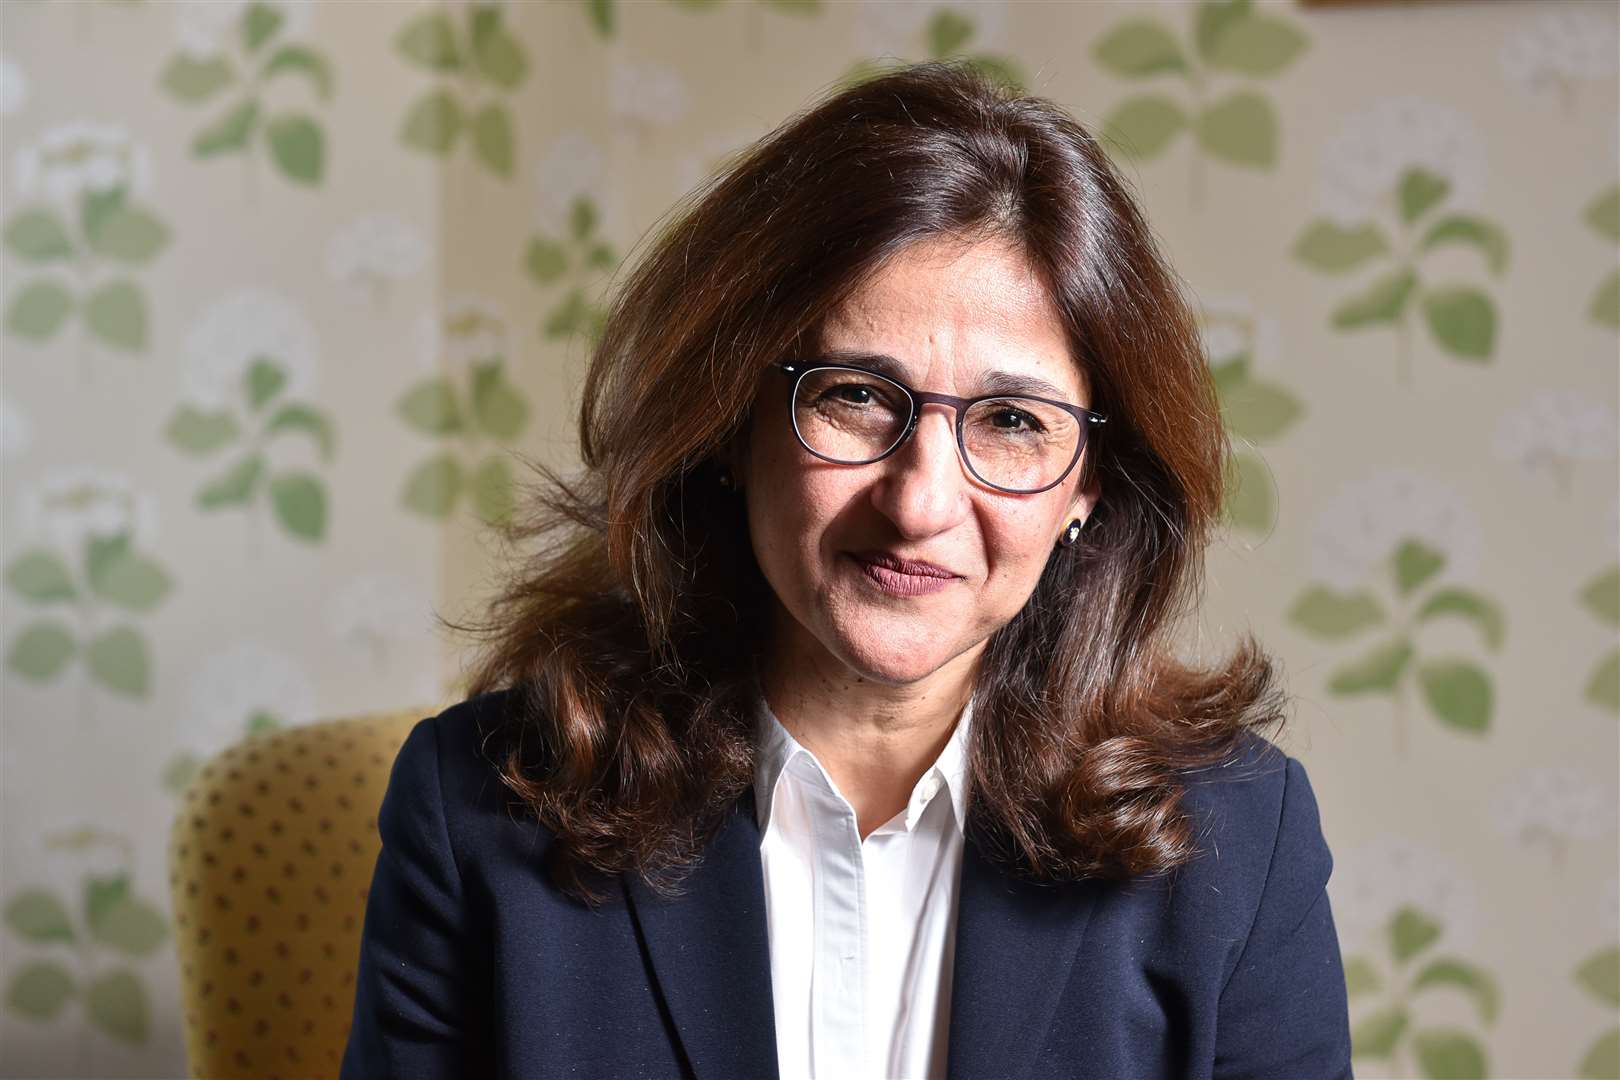 Bank of England deputy governor Minouche Shafik still thinks the next move for interest rates will be a hike